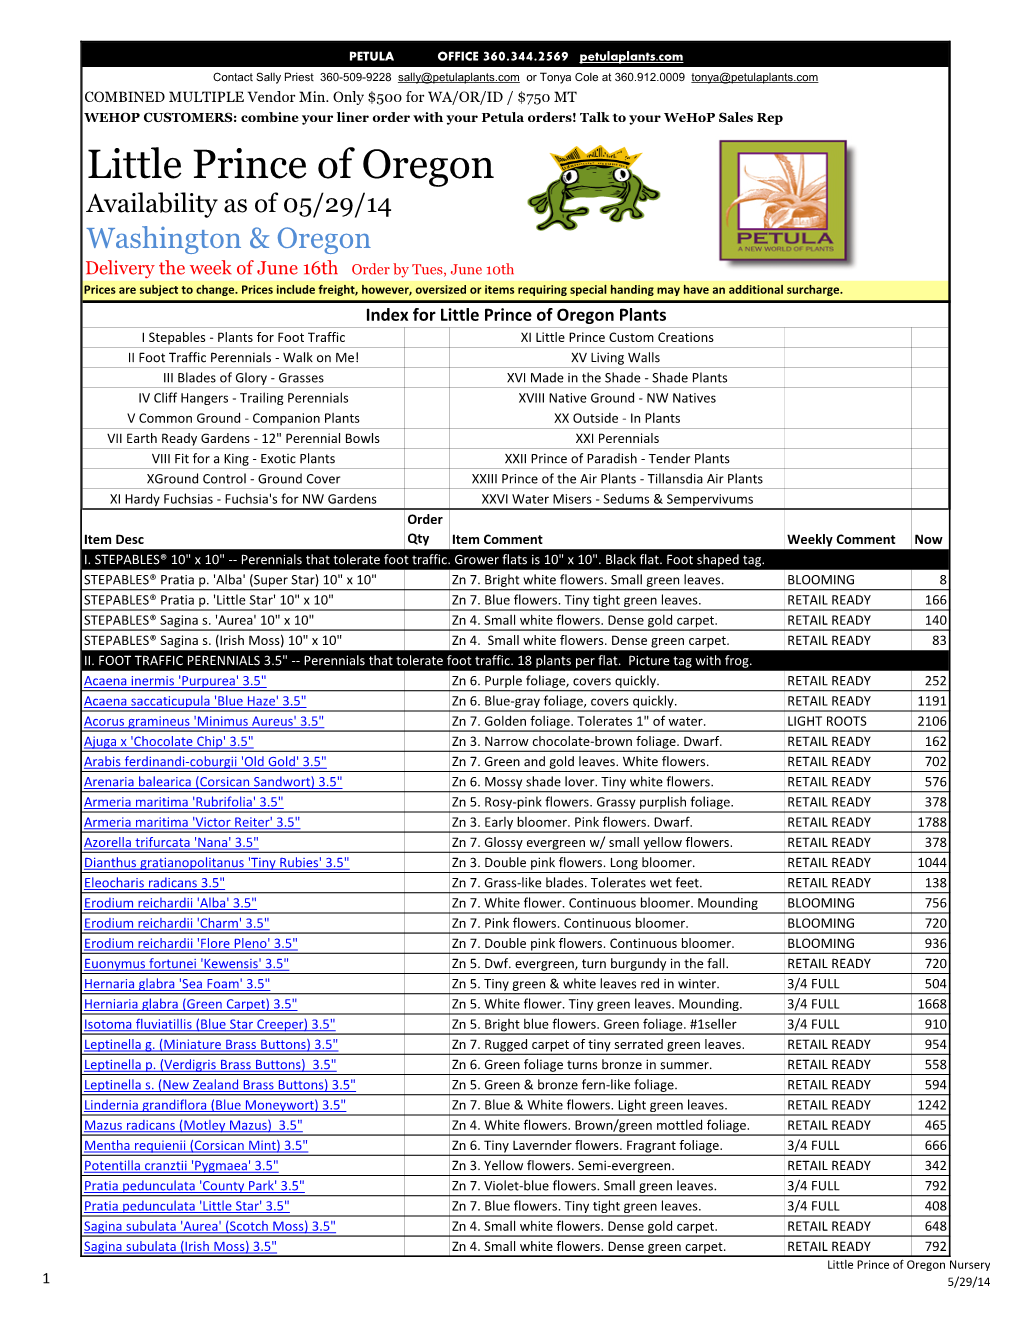 Little Prince of Oregon Availability As of 05/29/14 Washington & Oregon Delivery the Week of June 16Th Order by Tues, June 10Th Prices Are Subject to Change